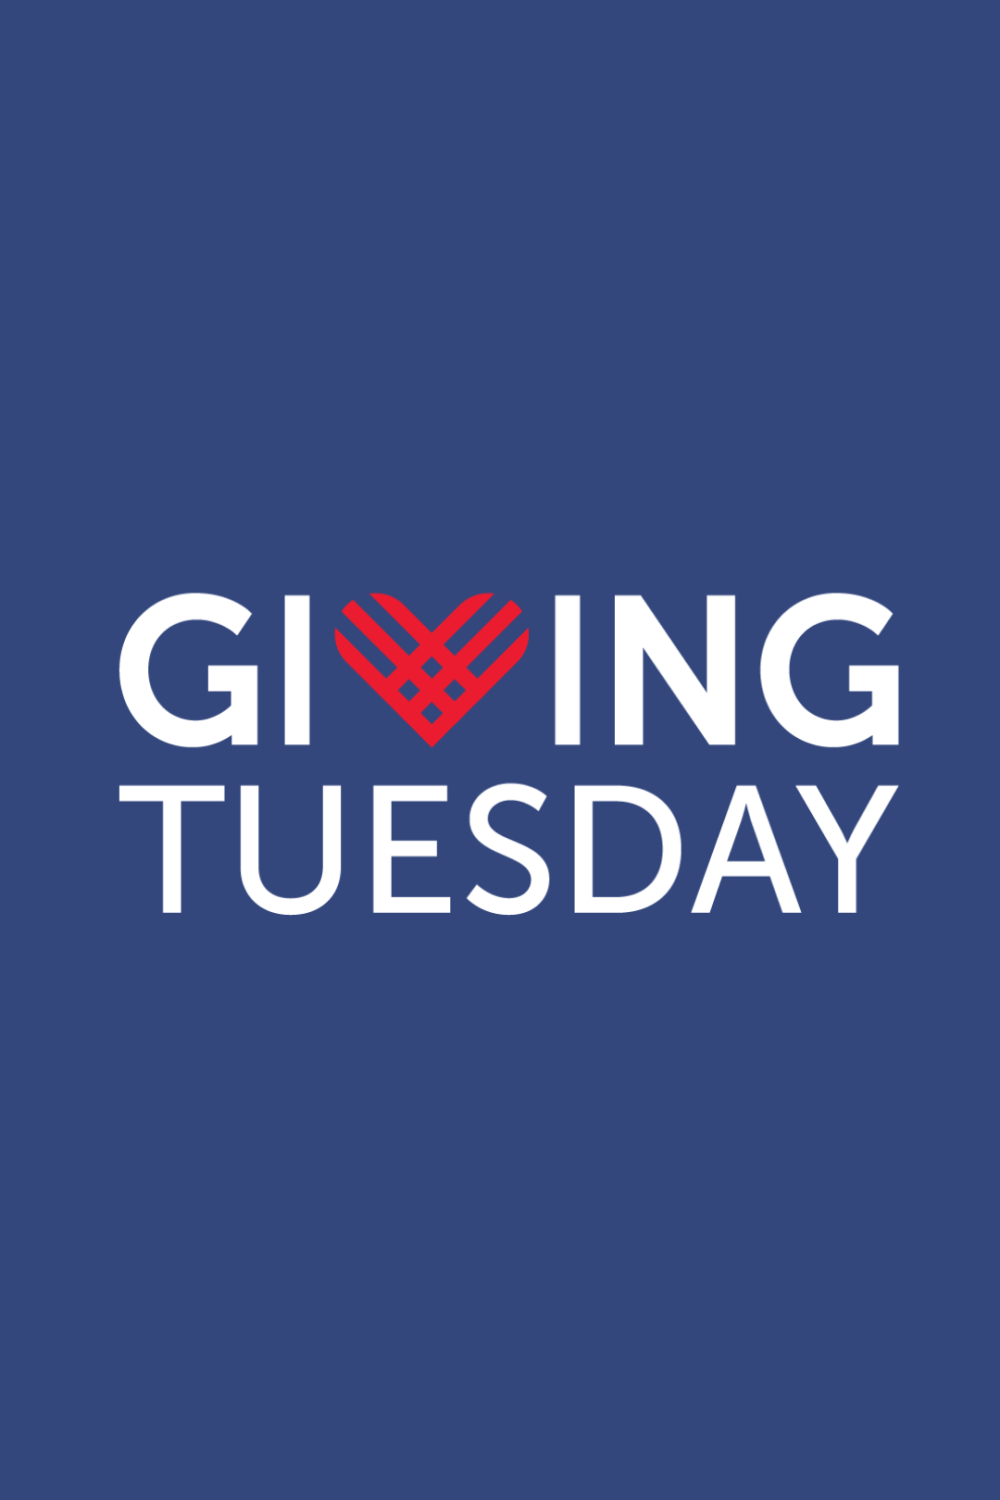 GivingTuesday: A Day to Give To Others After a Weekend of Getting